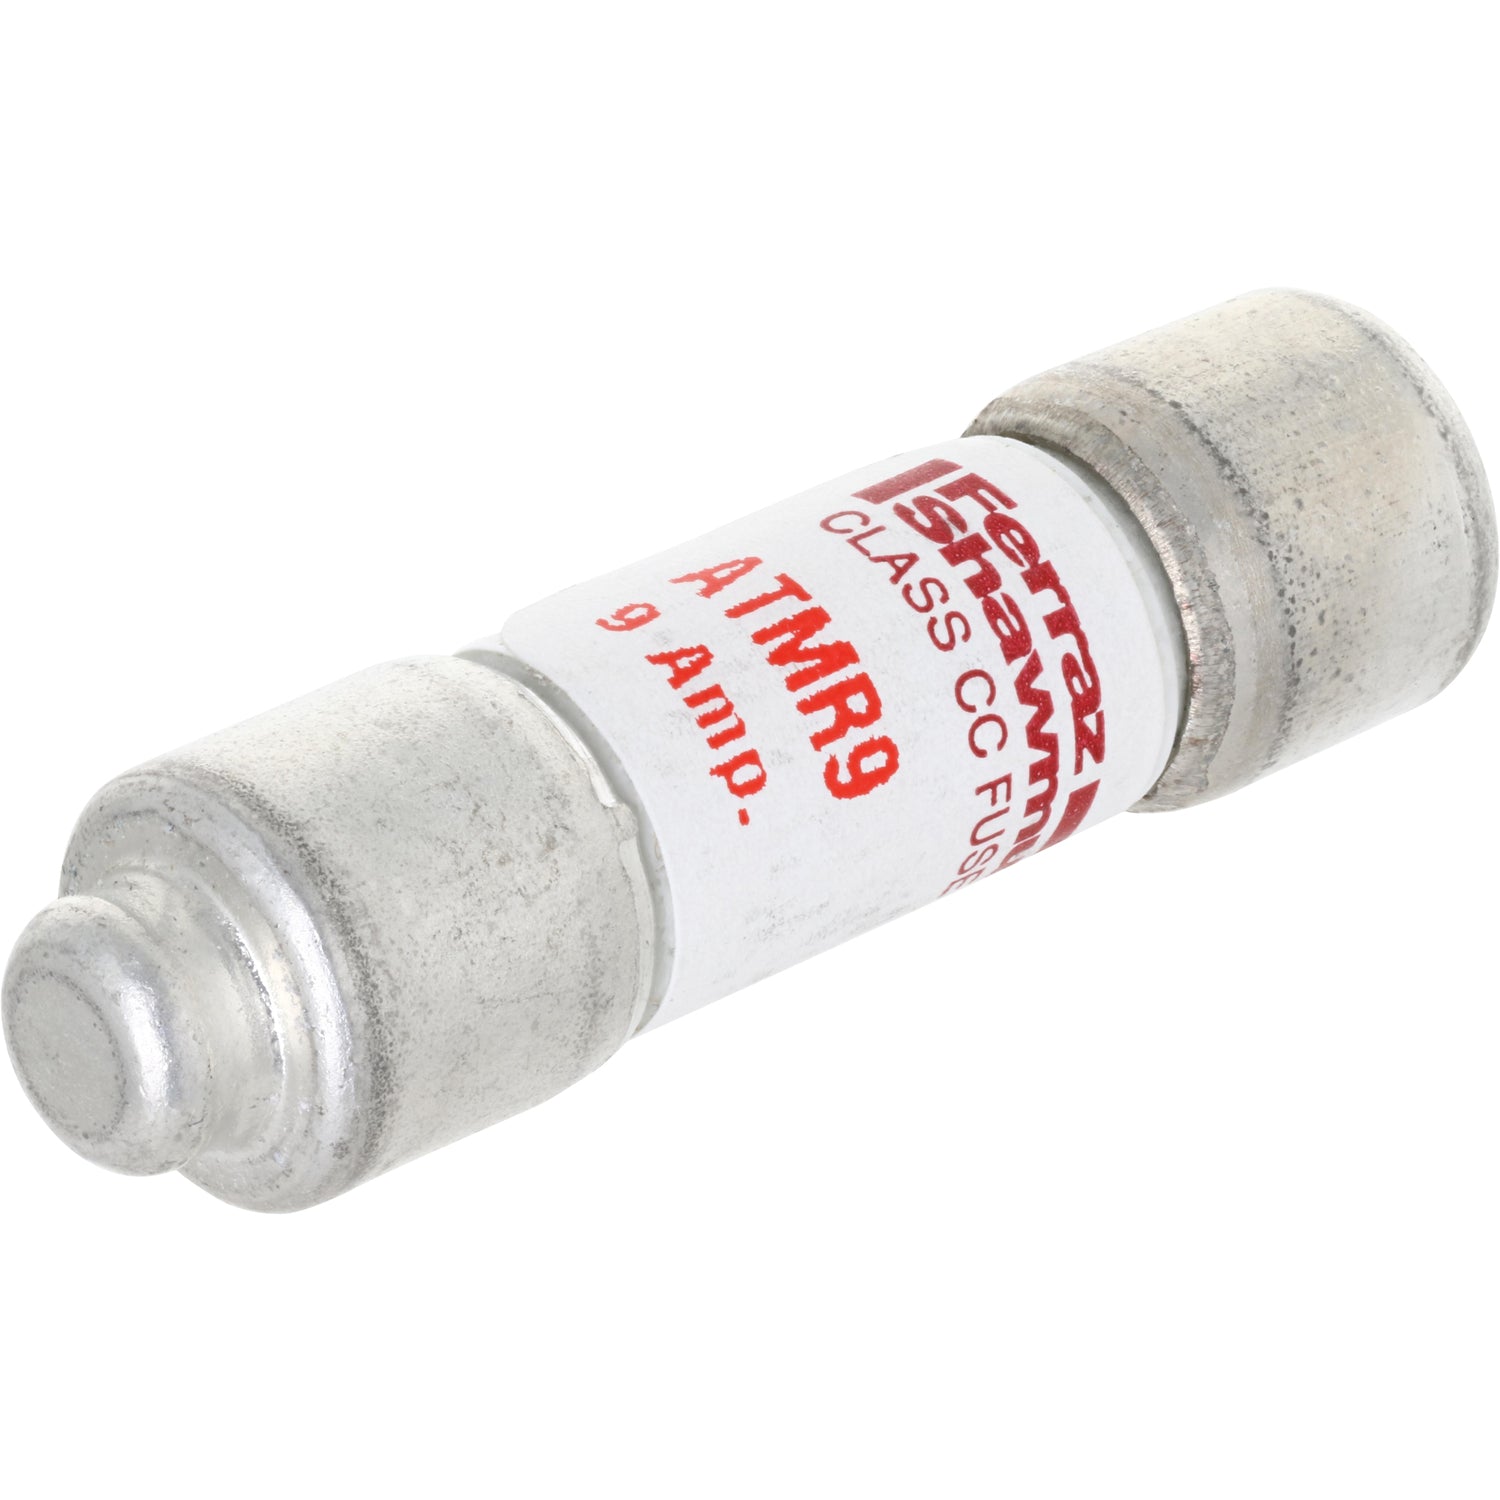 Mersen 9A Fast Acting Fuse 0.5625" x 2" shown on white background.